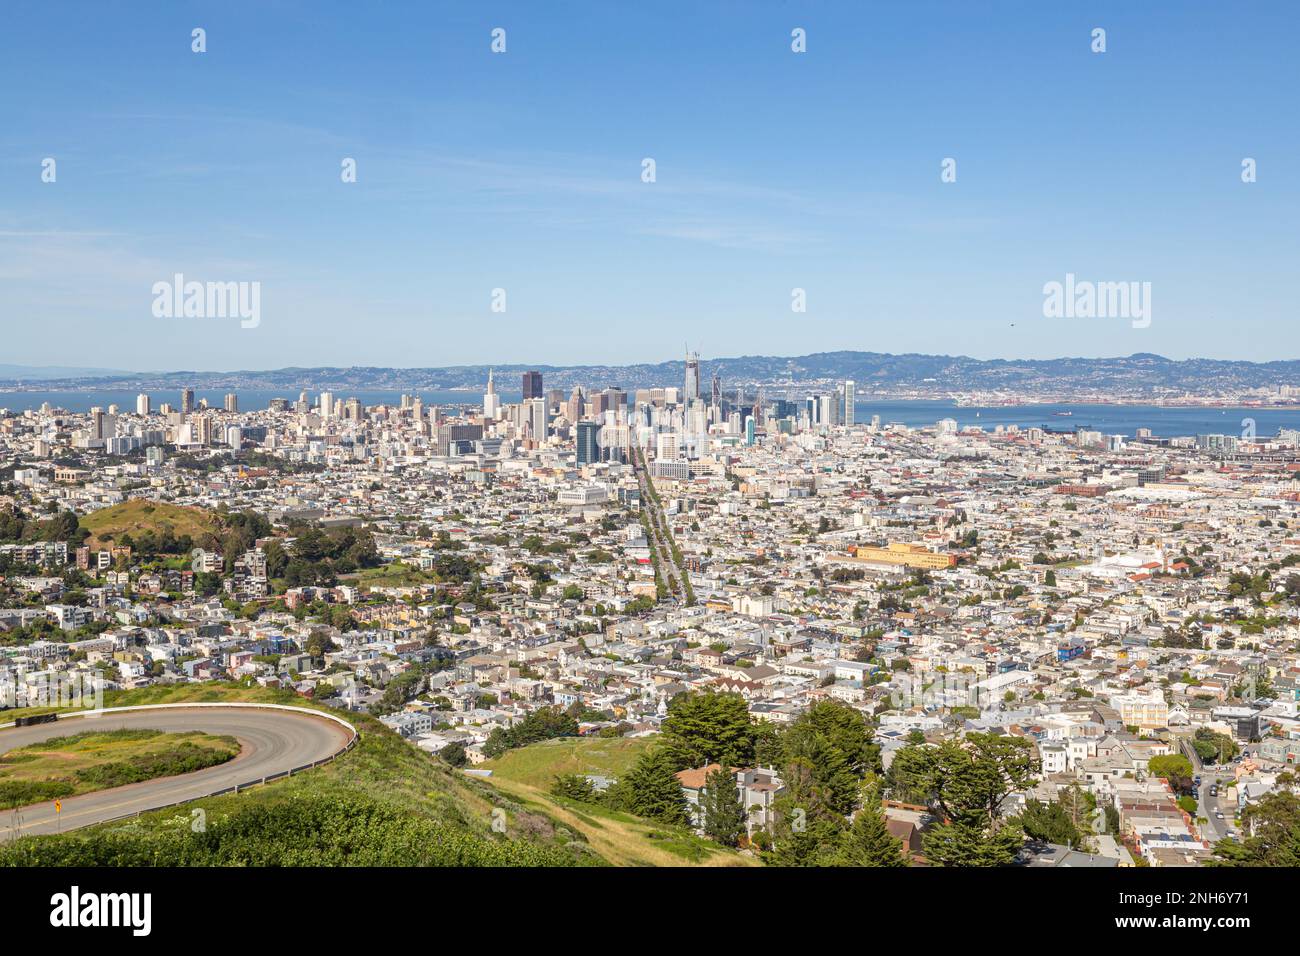 San Francisco skyline panorama. Aerial view of downtown San Francisco. Downtown San Francisco aerial view of skyscrapers Stock Photo